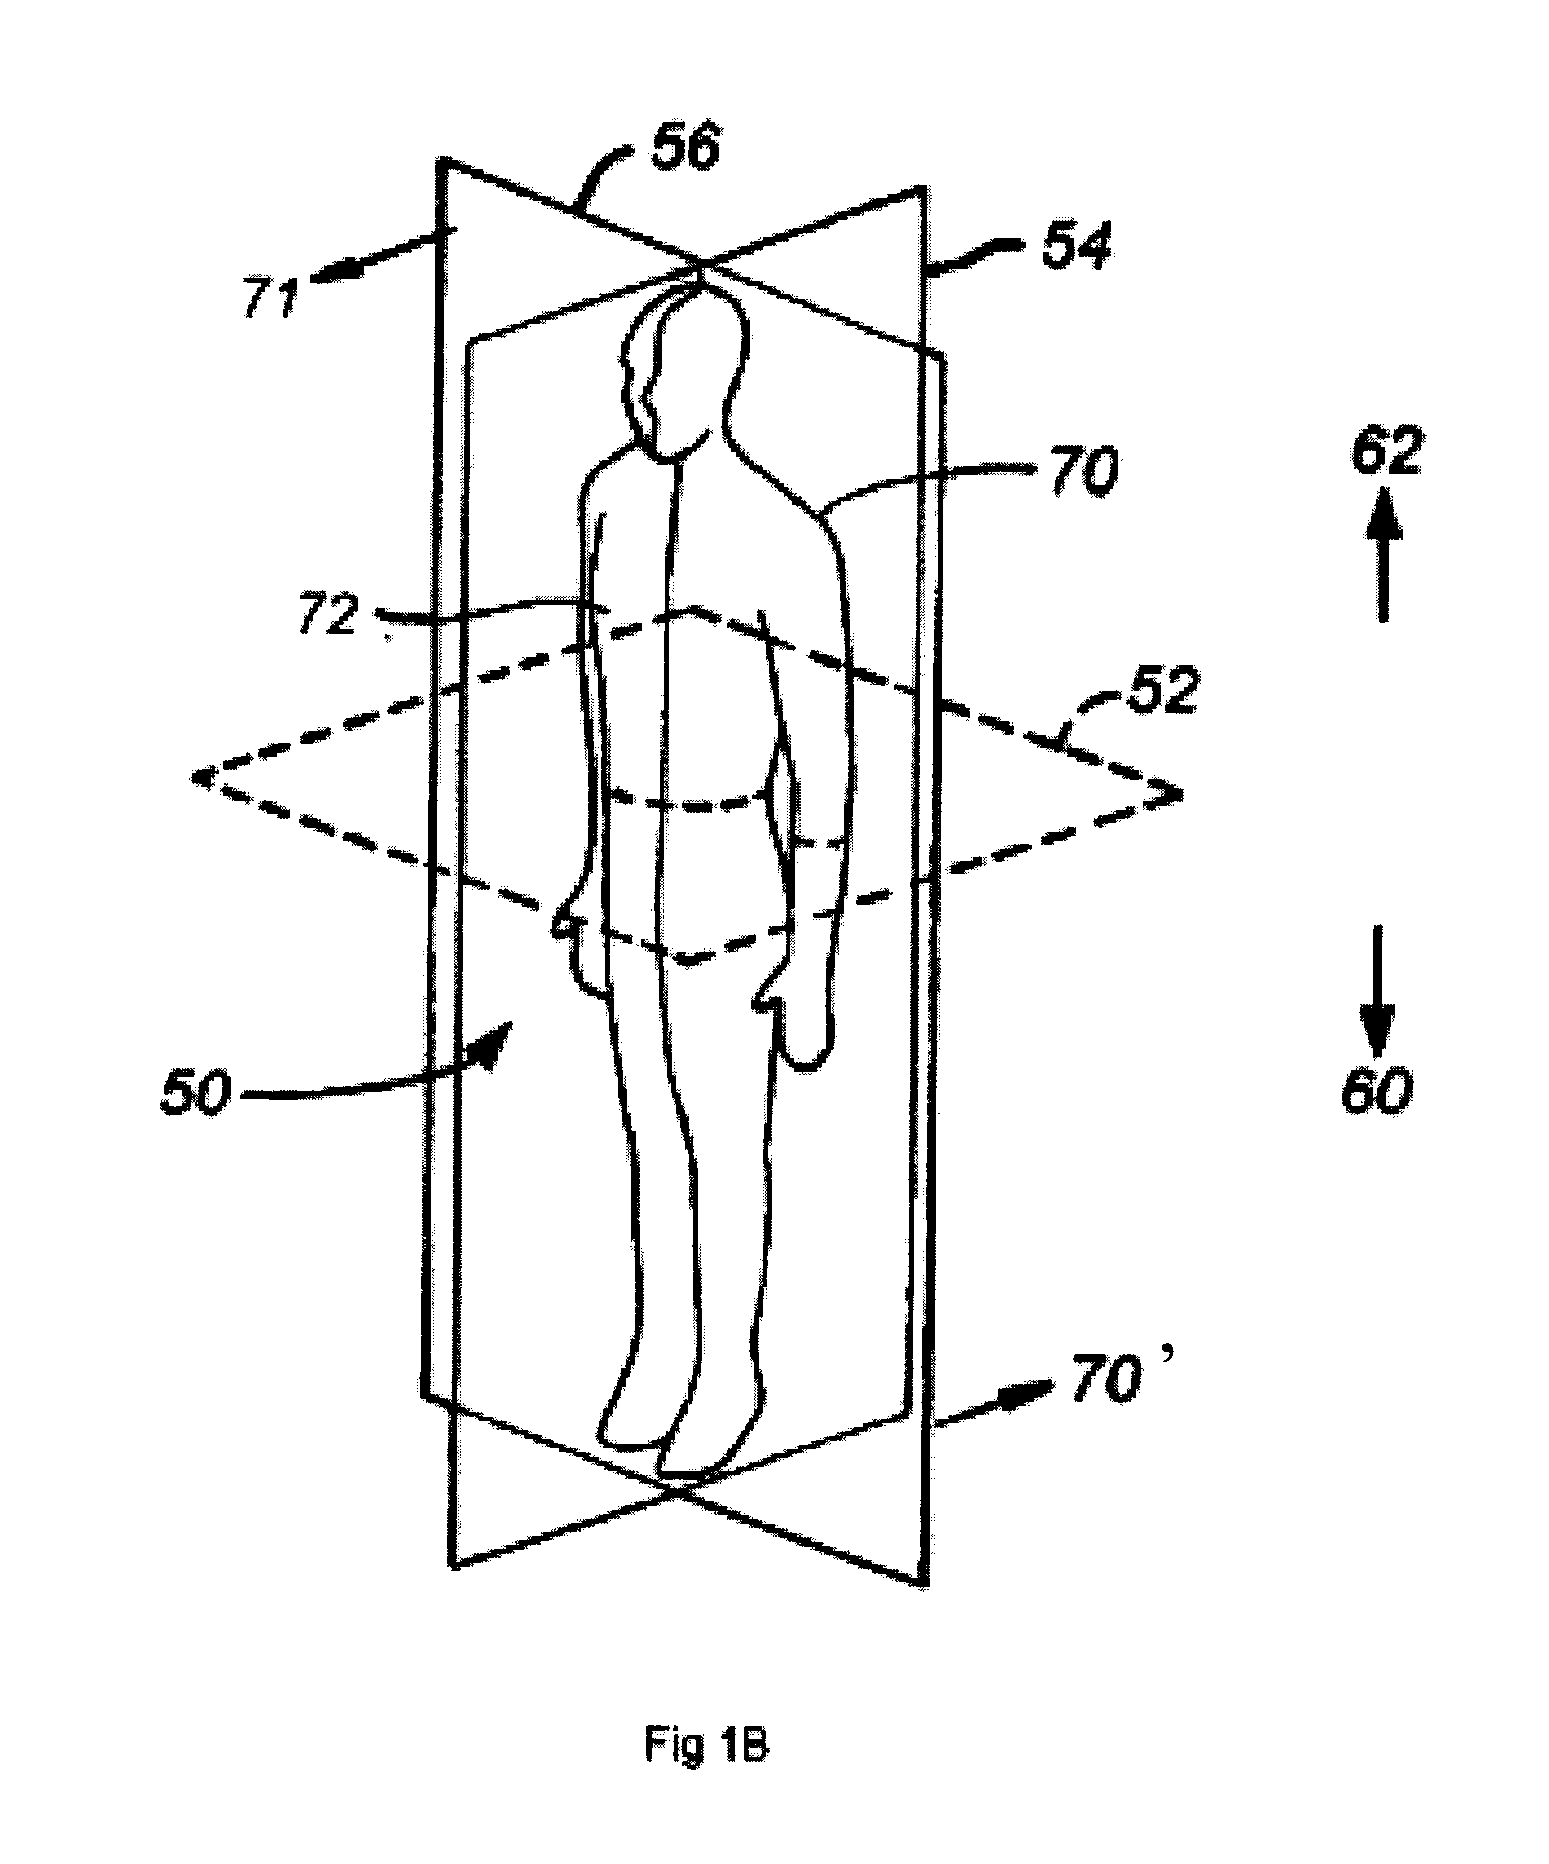 Methods, devices, systems, assemblies, and kits for tissue retraction in an oral cavity